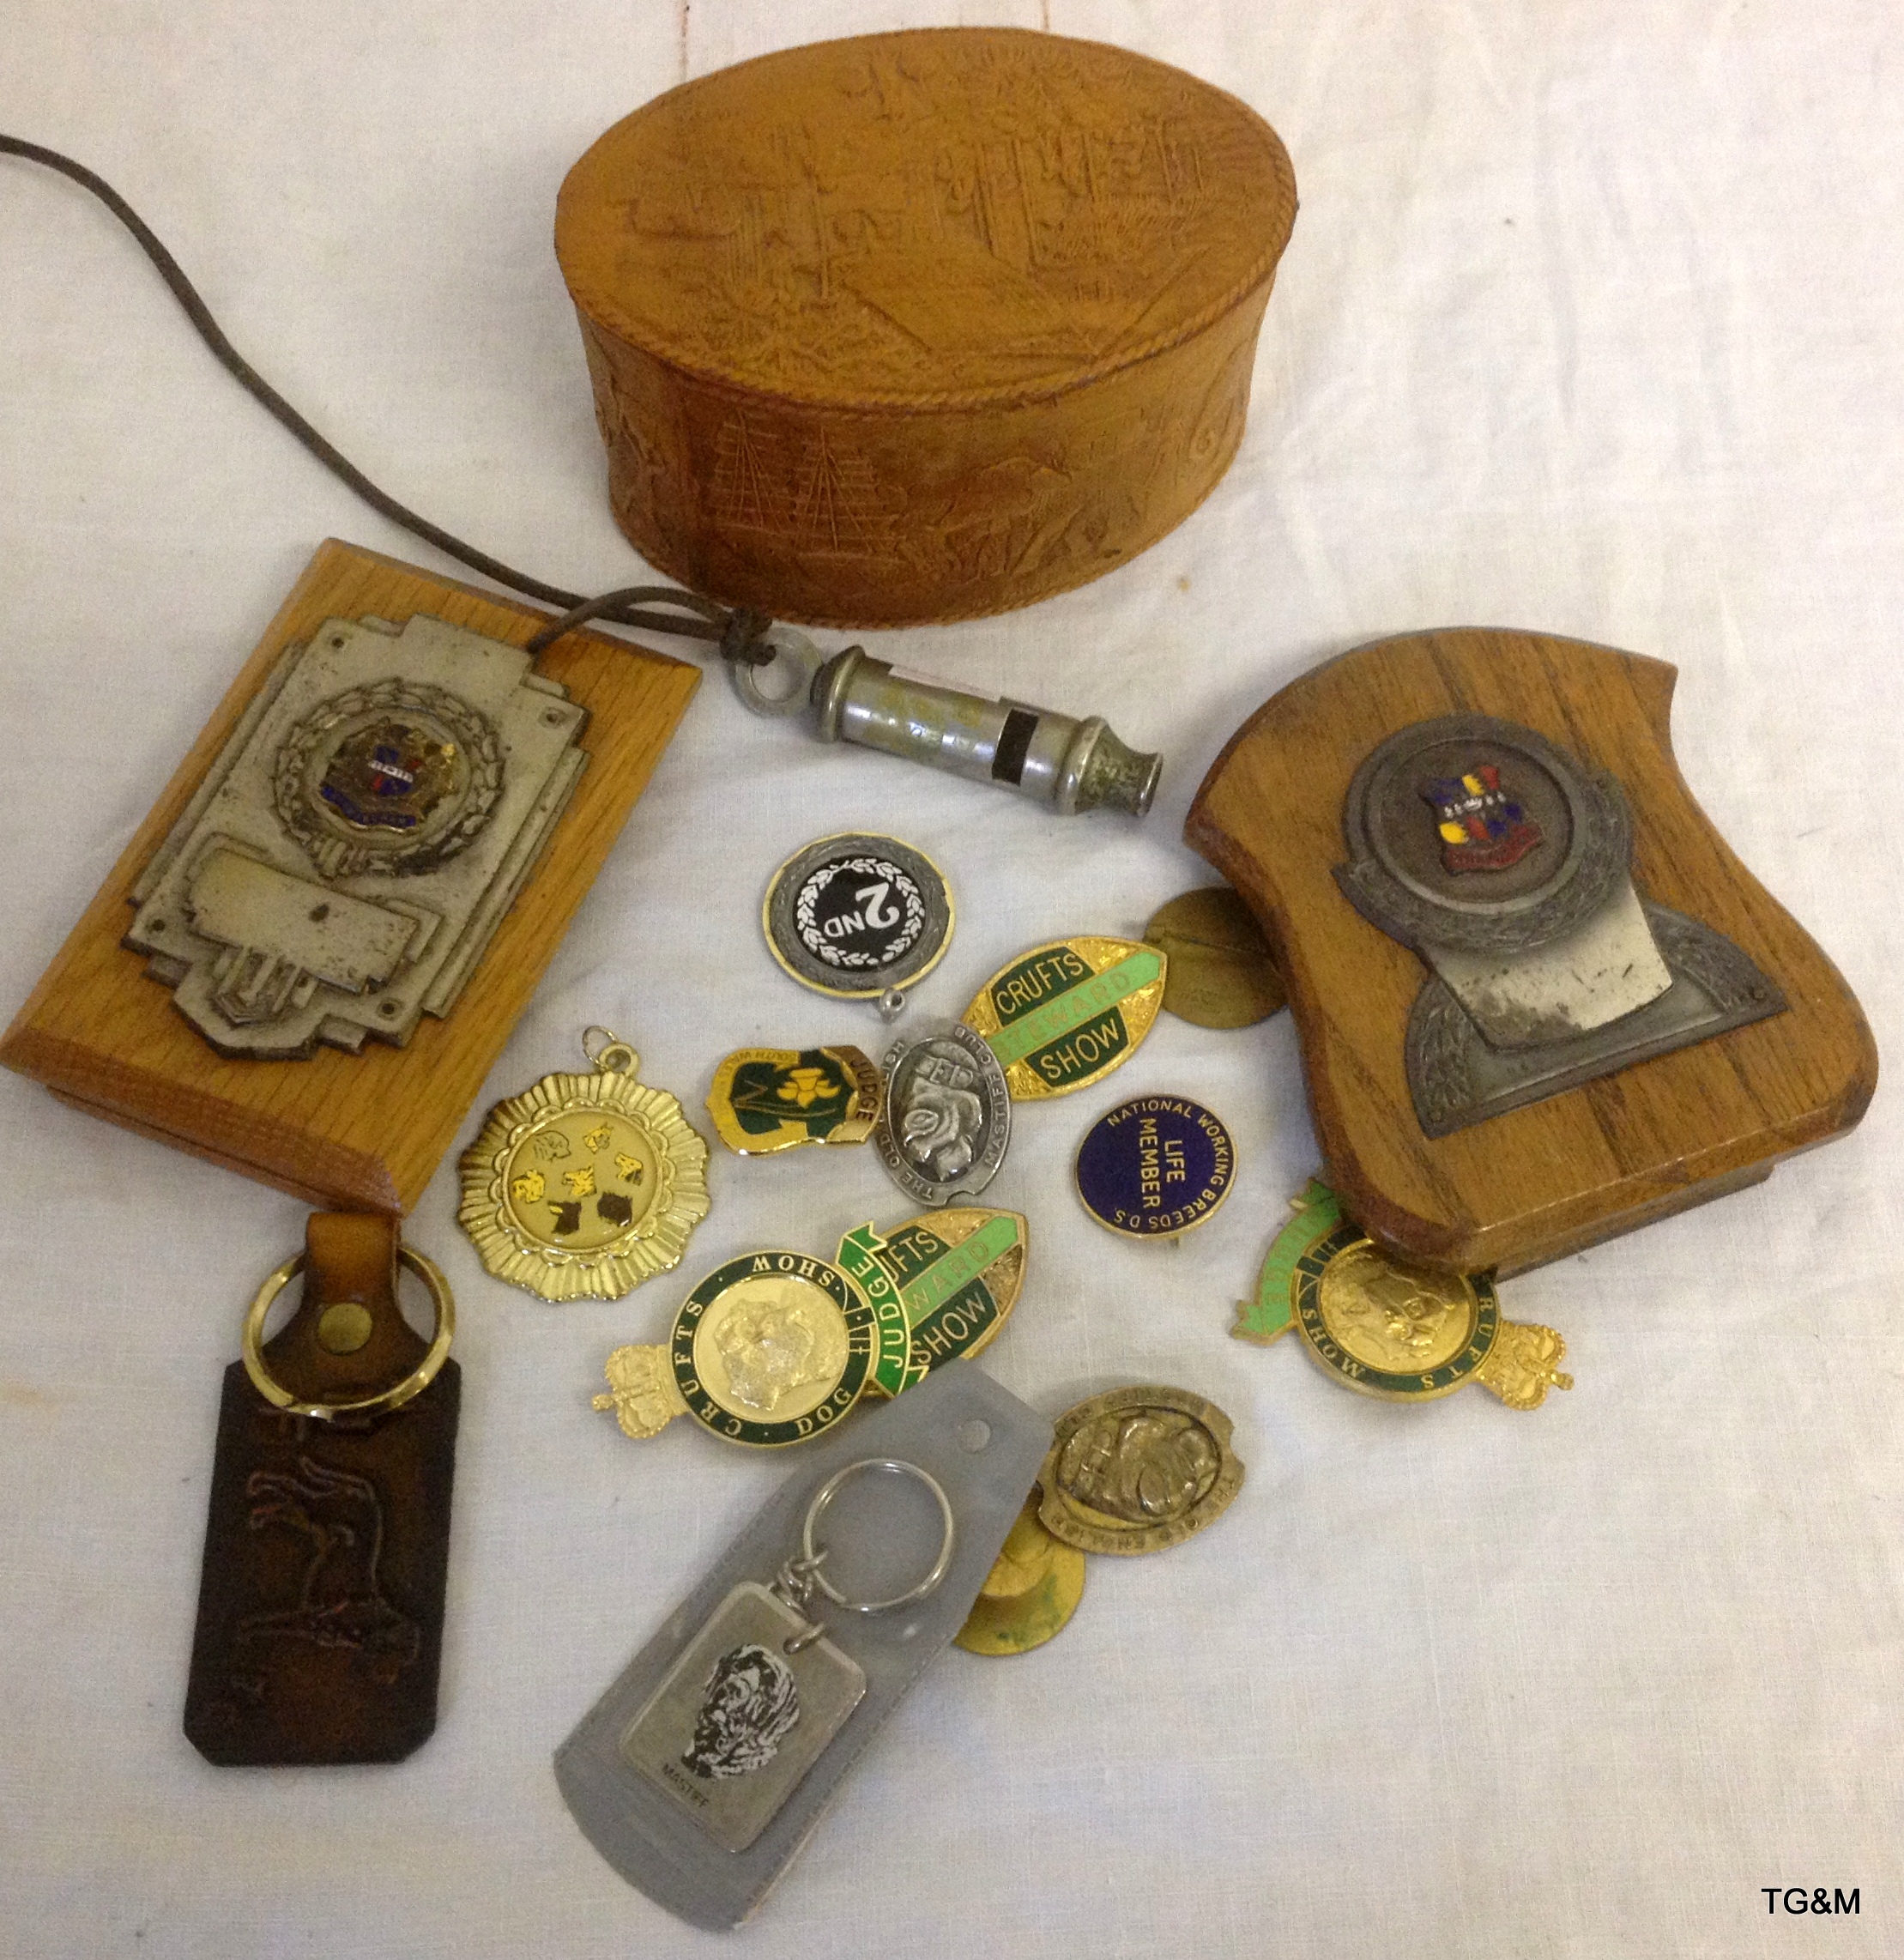 Collection of dog related items including badges, dog whistle, plaques (including silver badges)